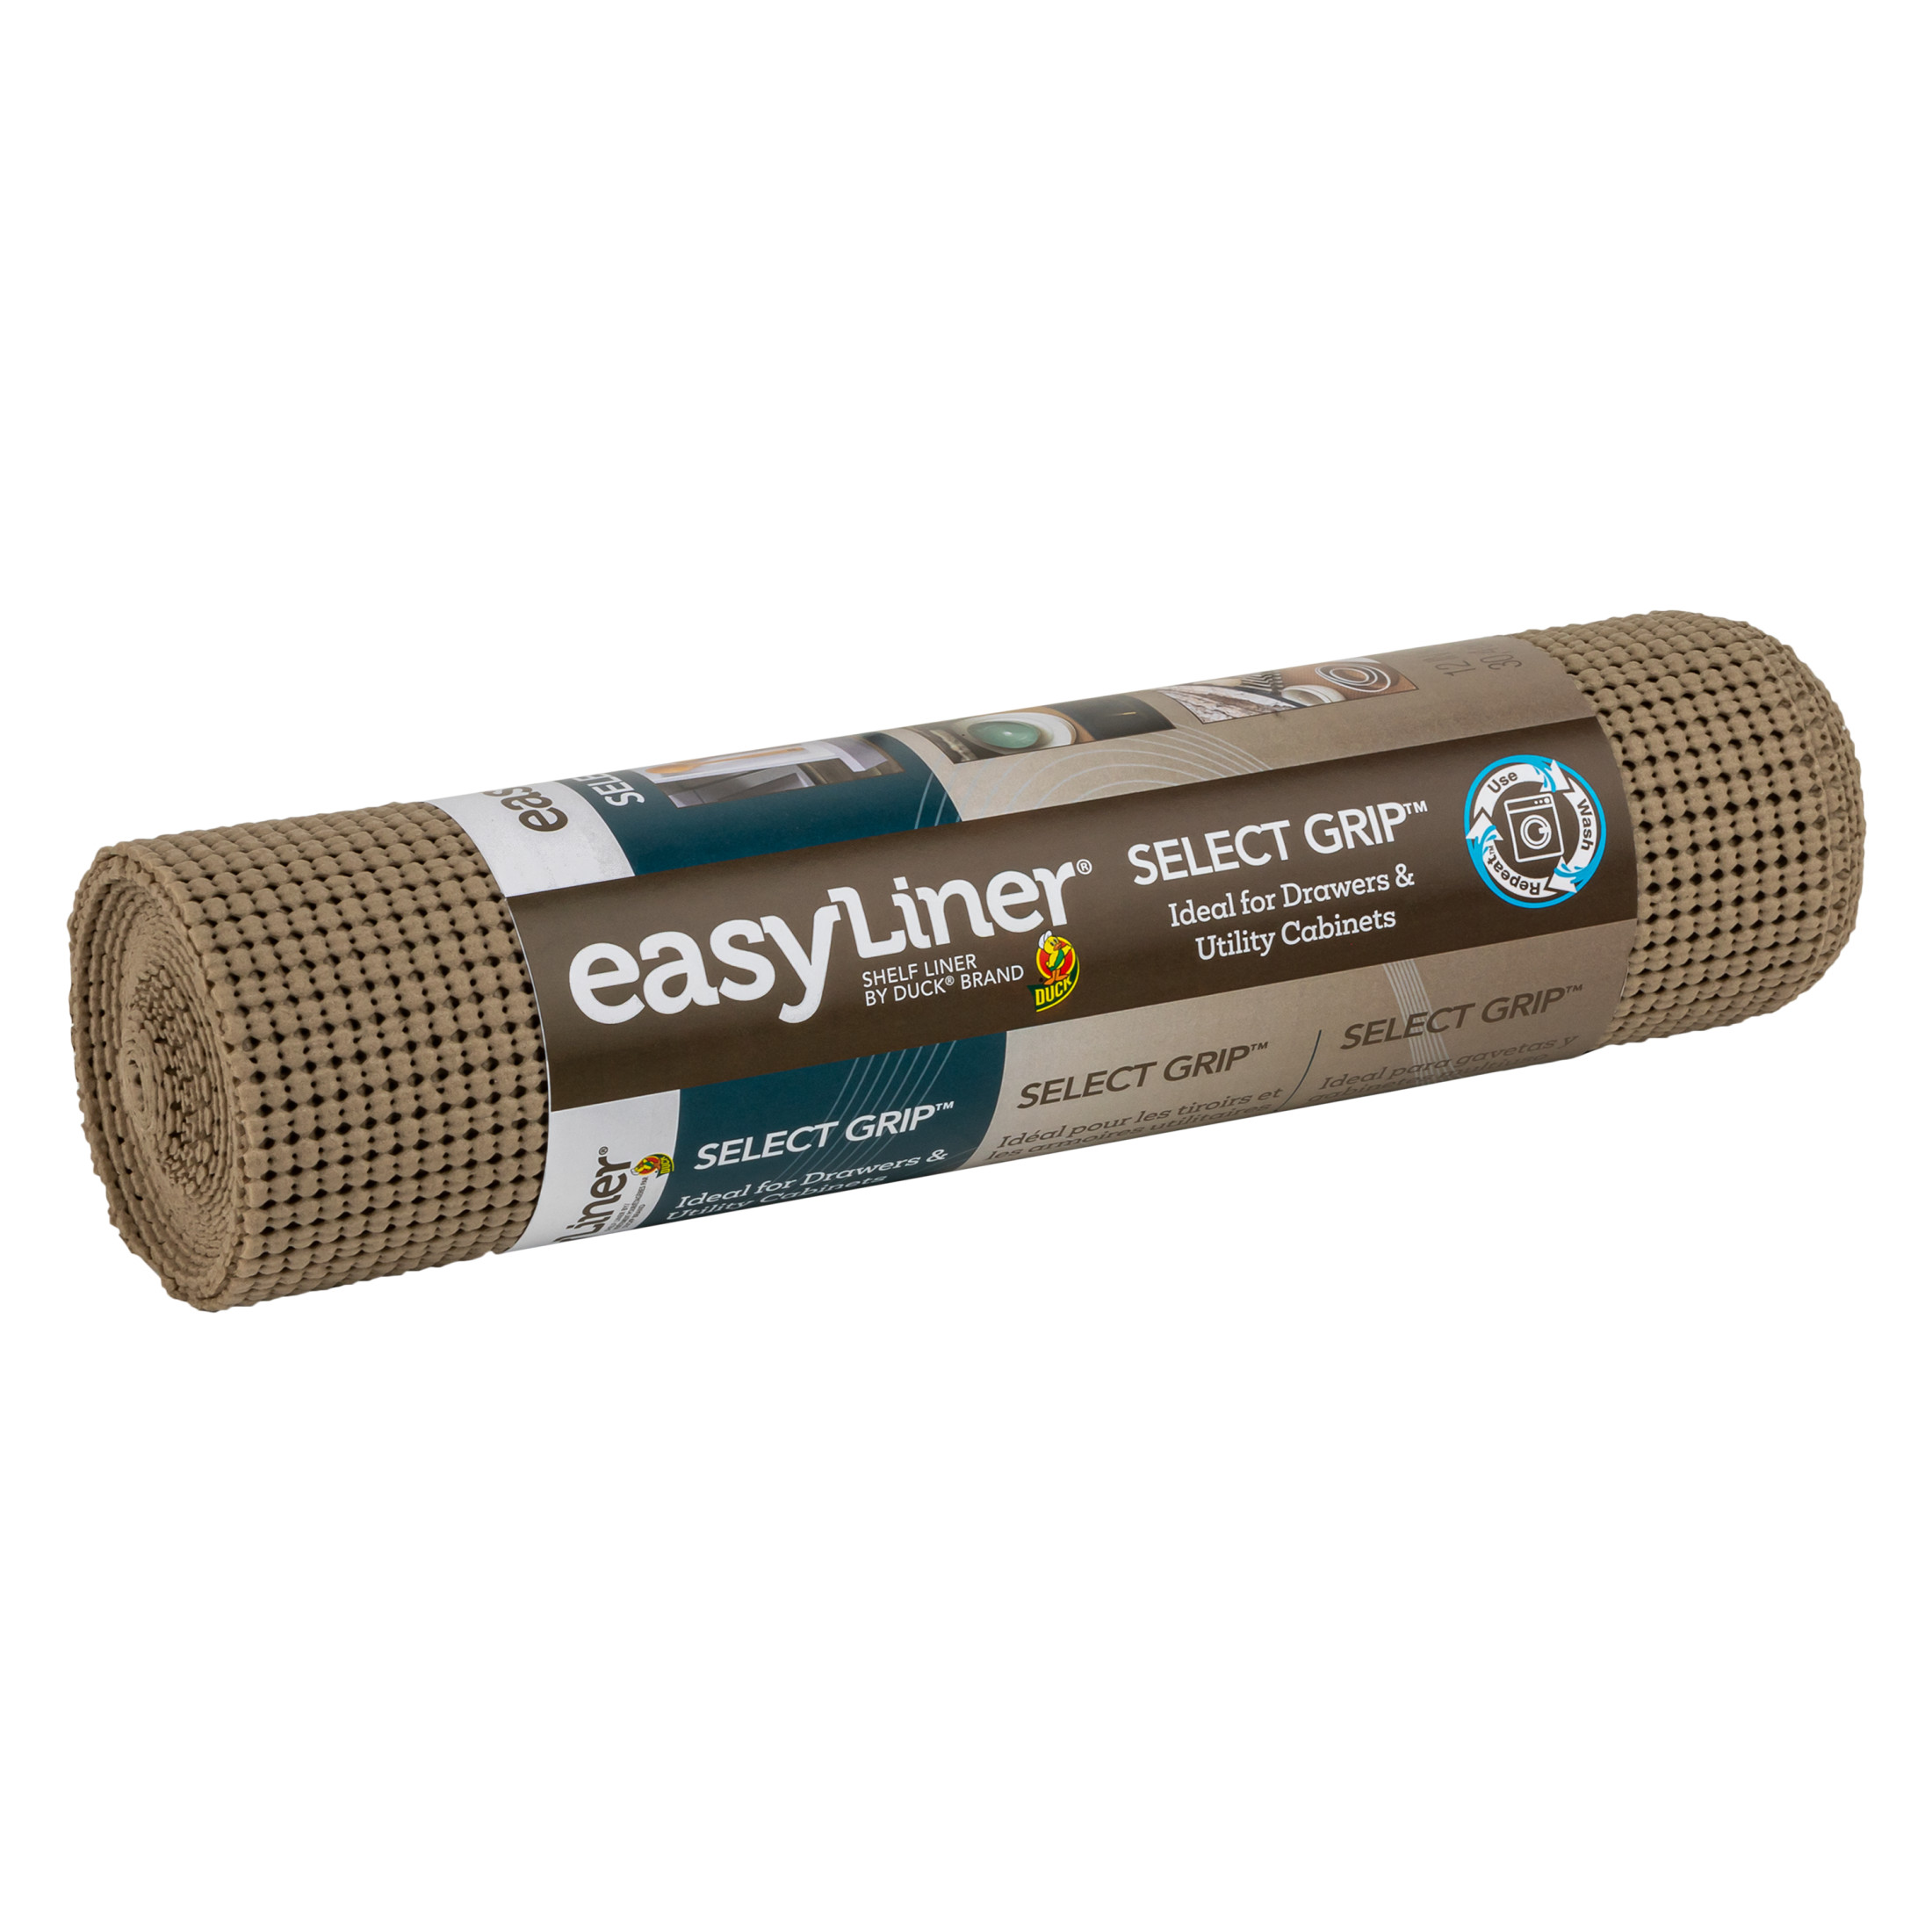 EasyLiner Select Grip Shelf Liner, Taupe, 12 in. x 10 ft. Roll - image 3 of 11